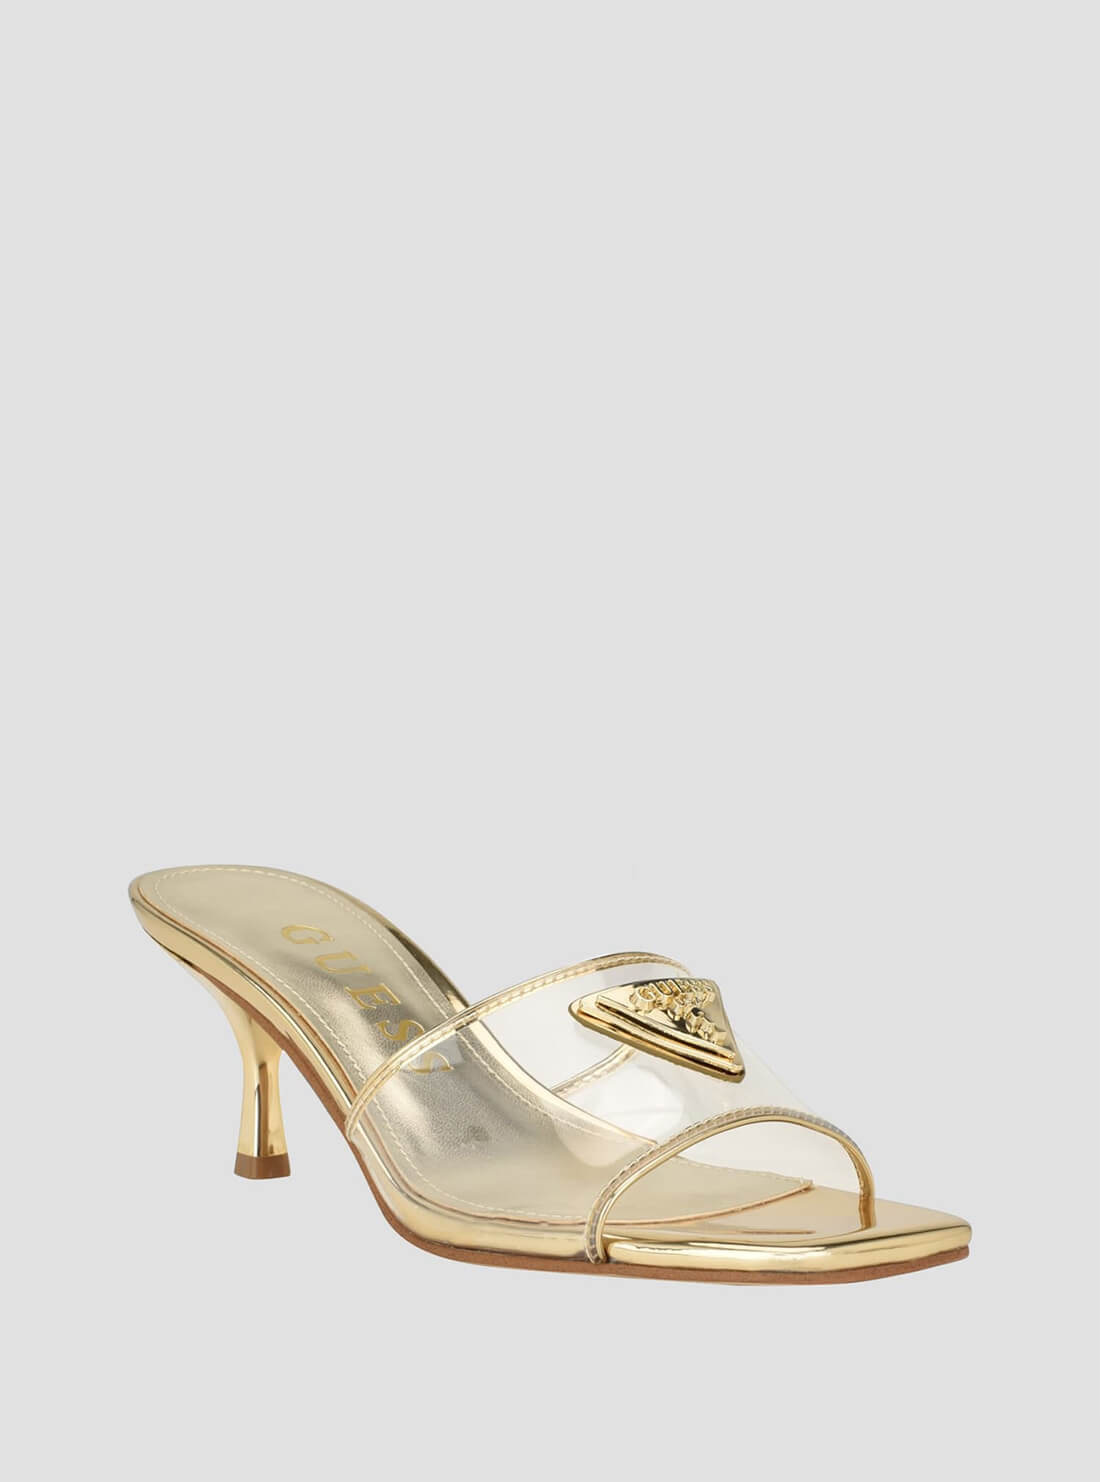 Gold Lusie Clear Kitten Heels | GUESS Women's Shoes | front view